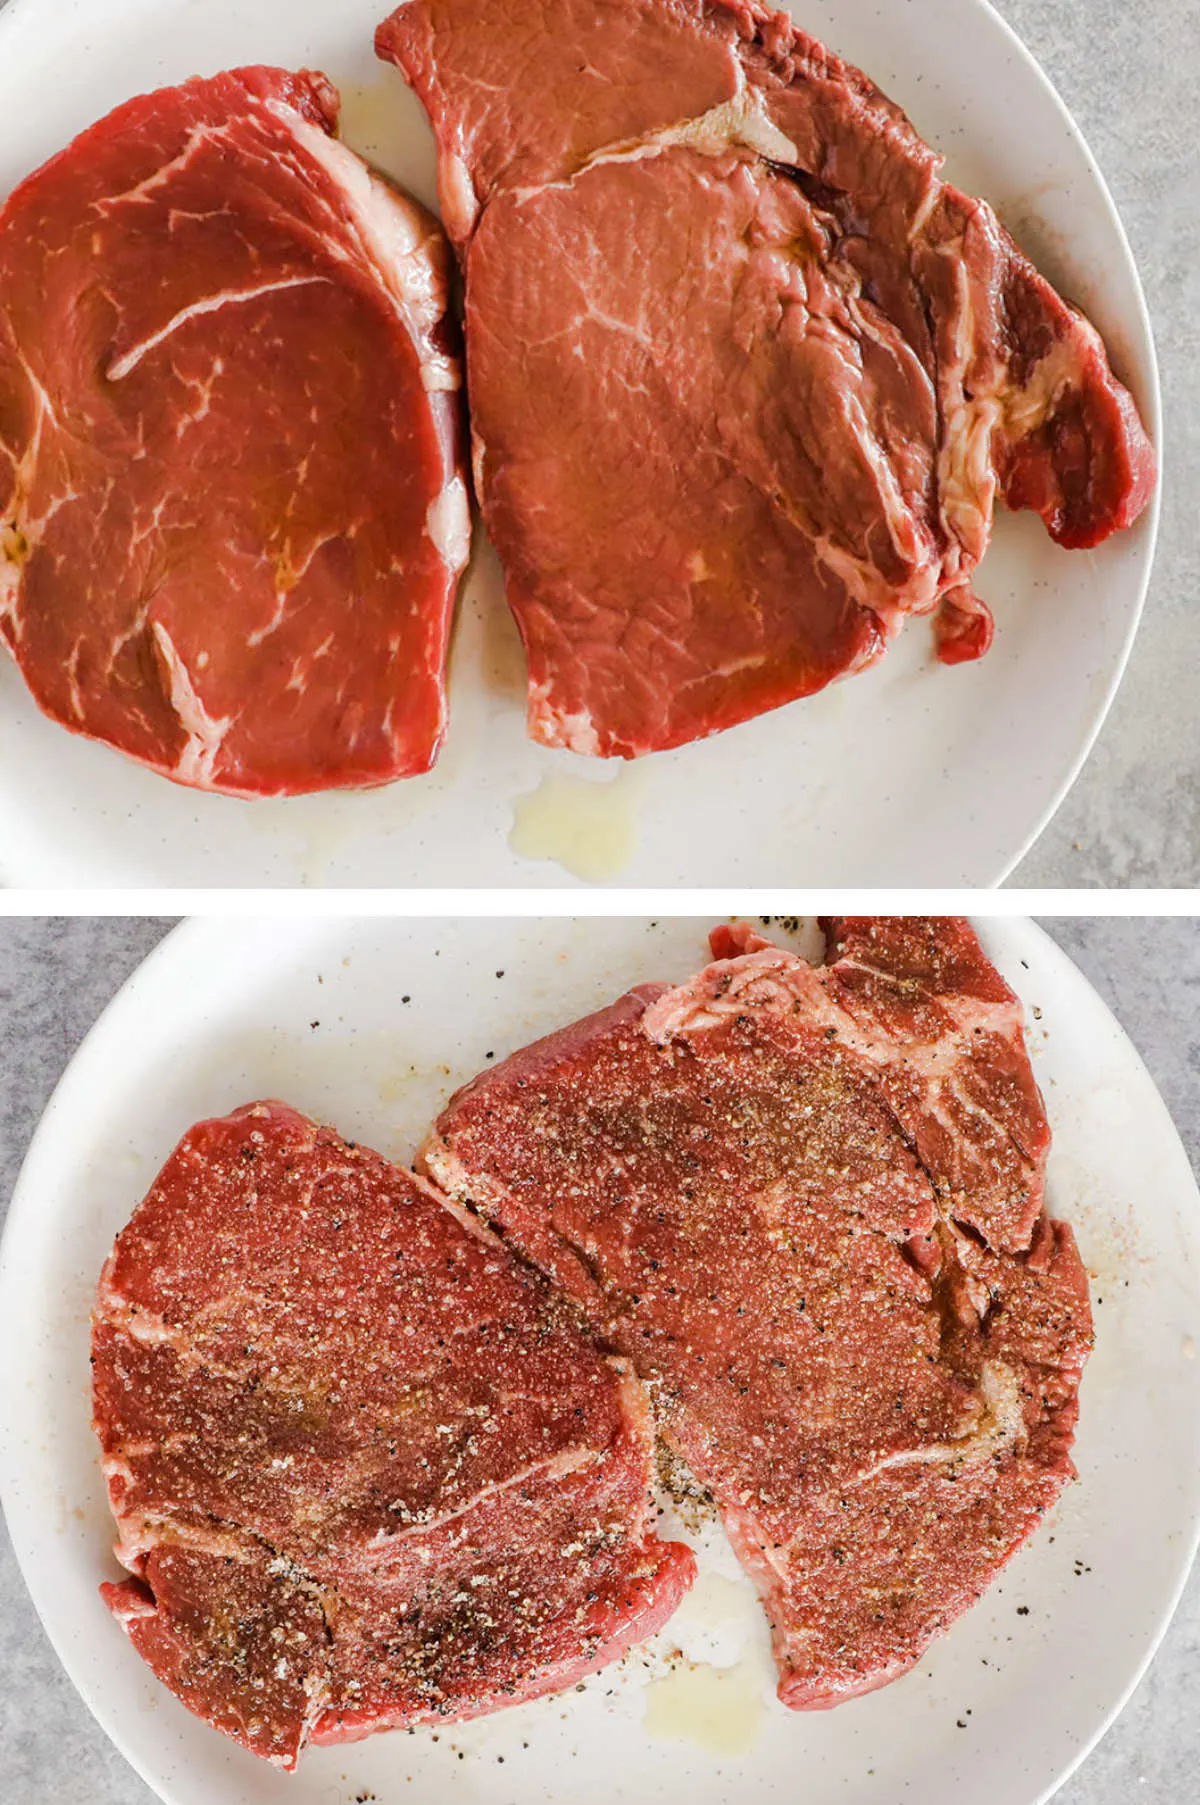 Two raw steaks, drizzled with olive oil and seasoned with salt and pepepr